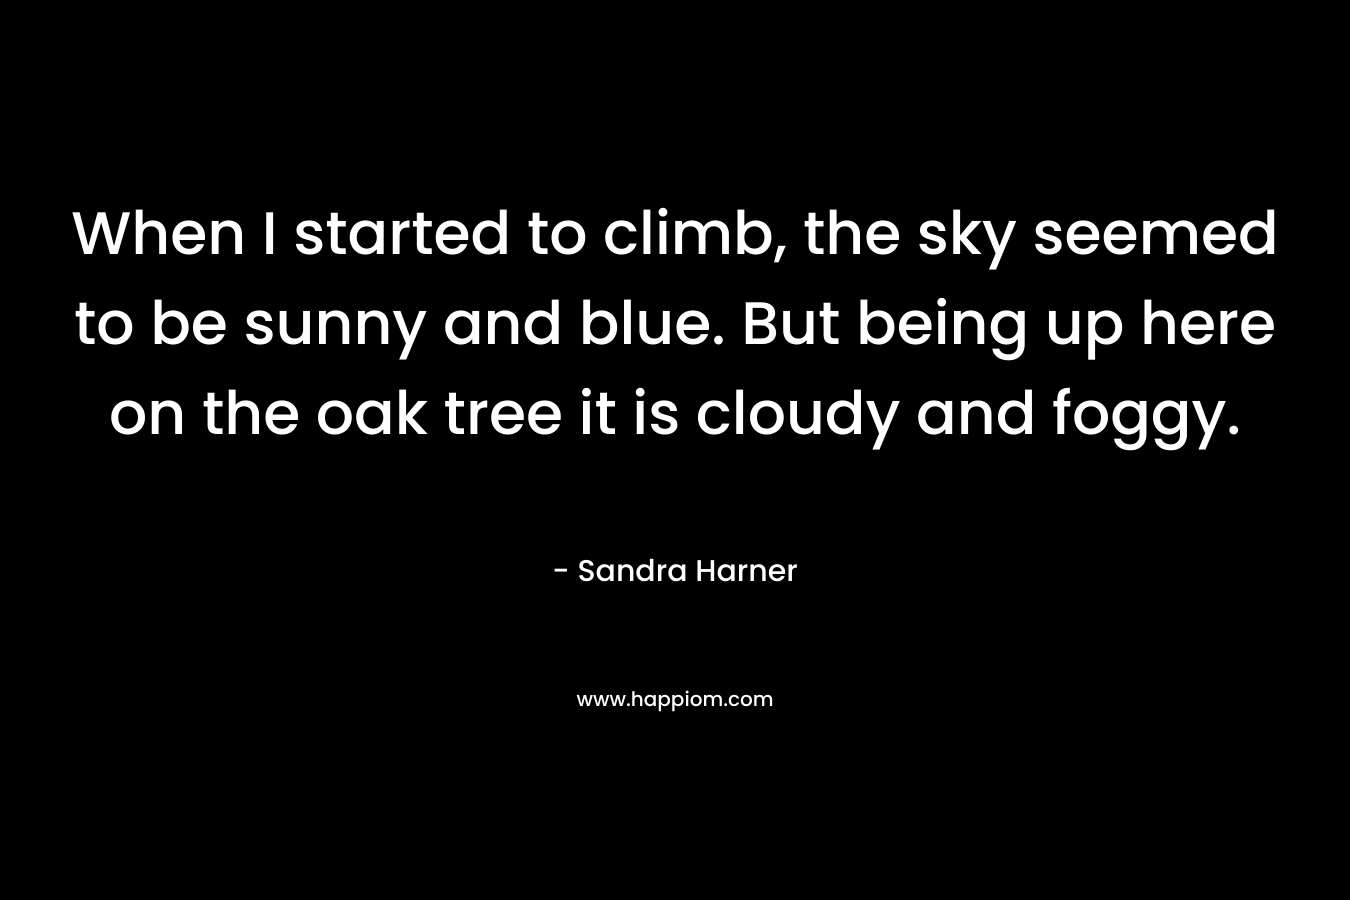 When I started to climb, the sky seemed to be sunny and blue. But being up here on the oak tree it is cloudy and foggy.